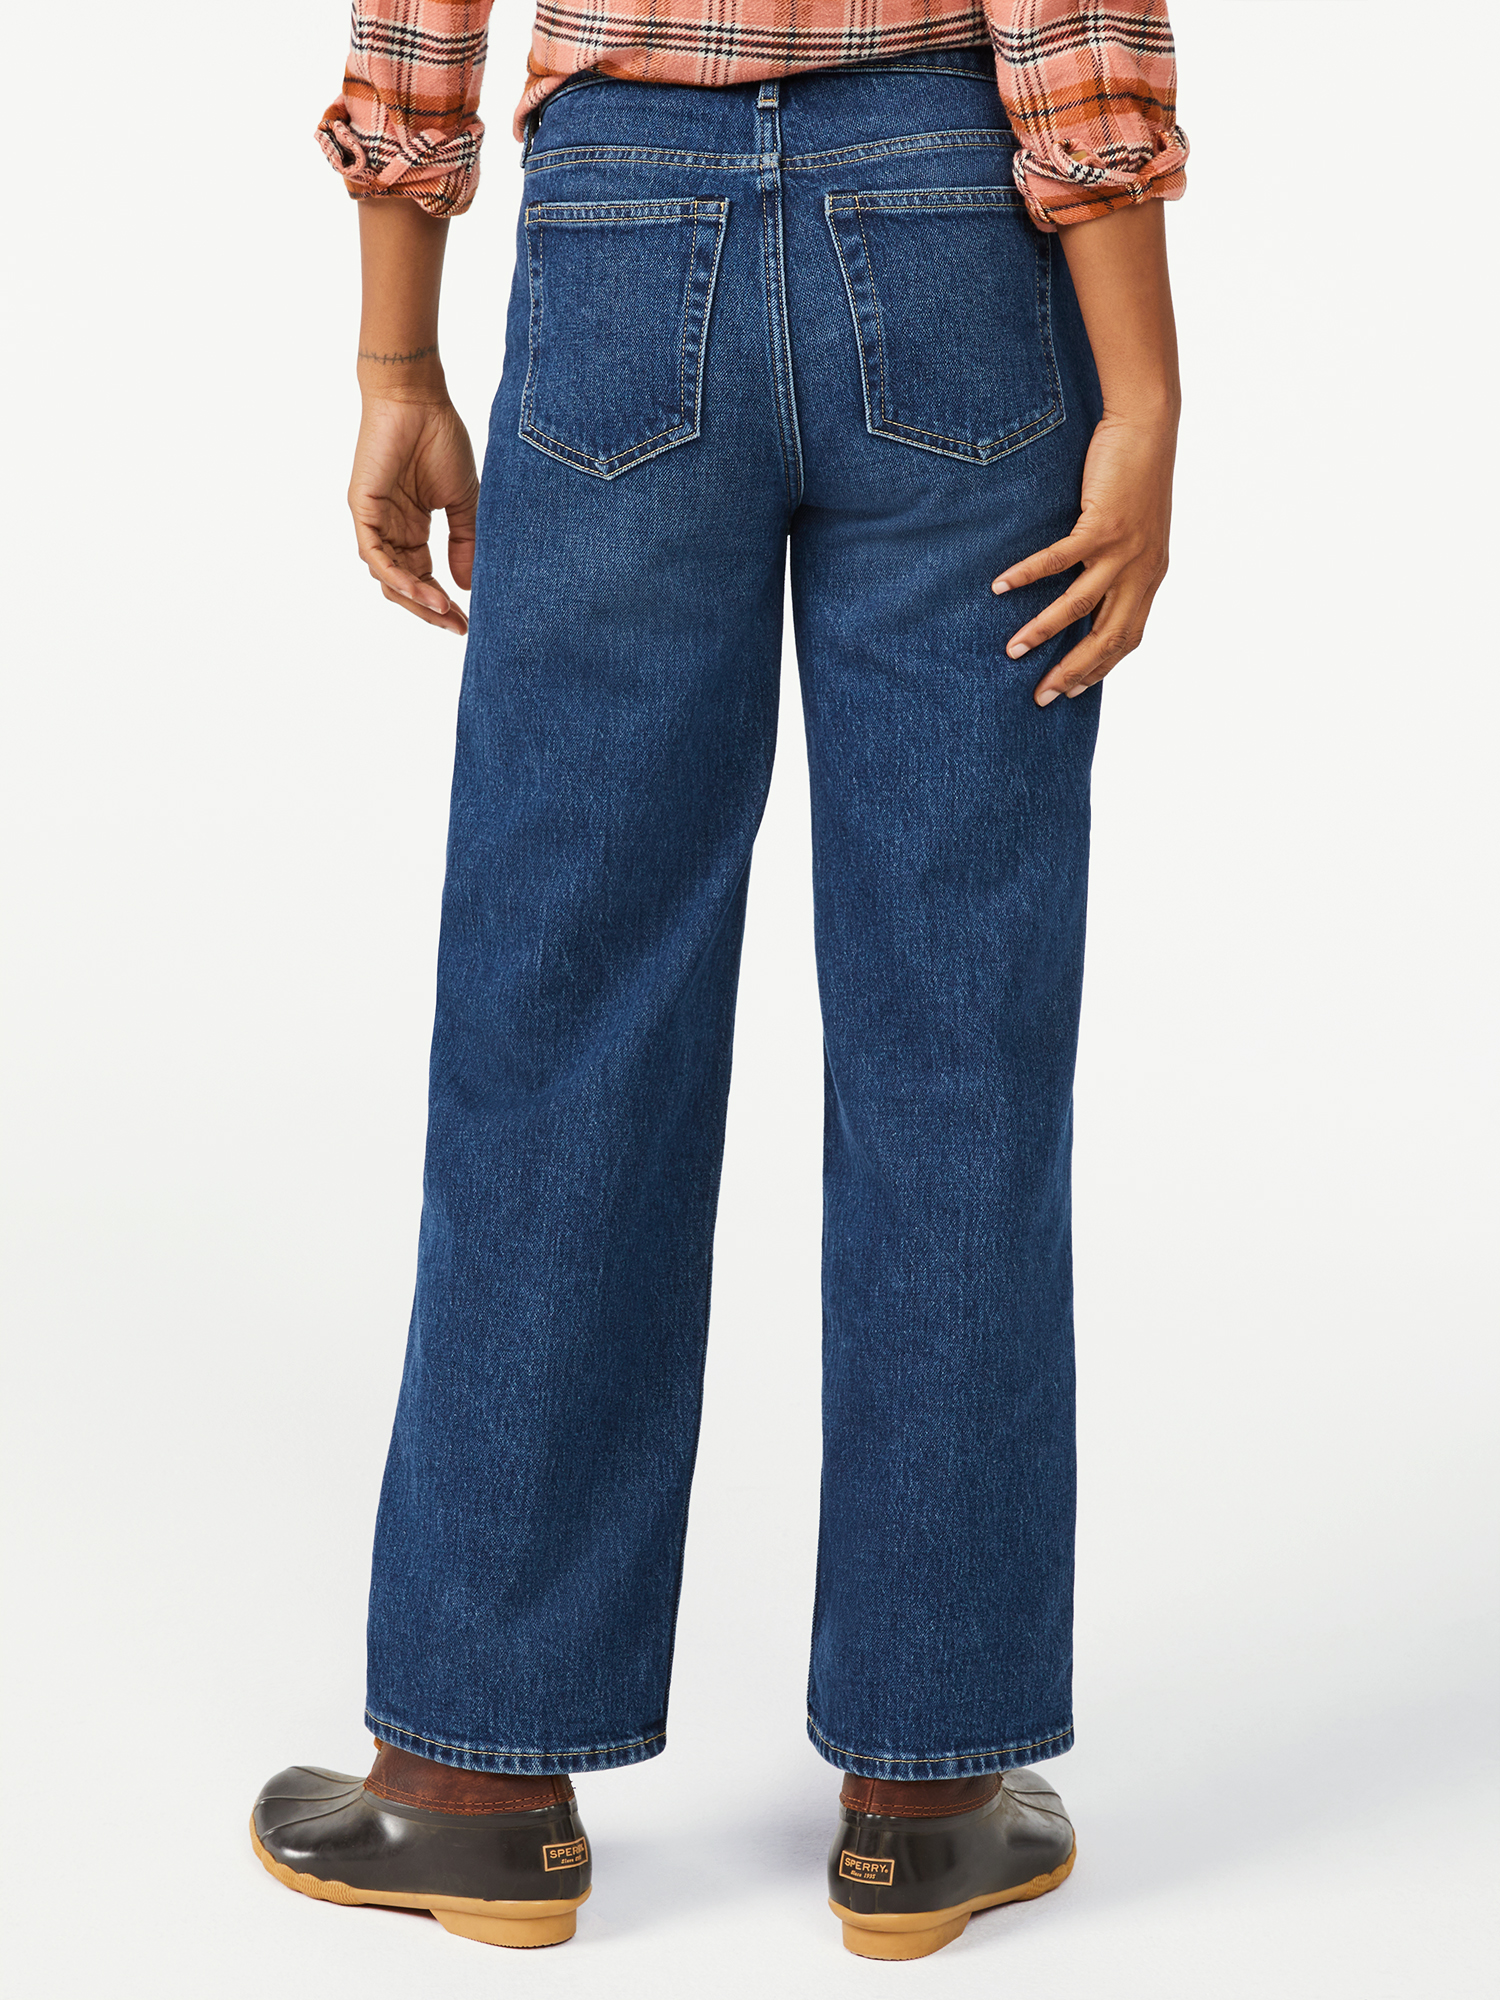 Free Assembly Women's Super High Rise Crop Wide Straight Jean - image 2 of 7